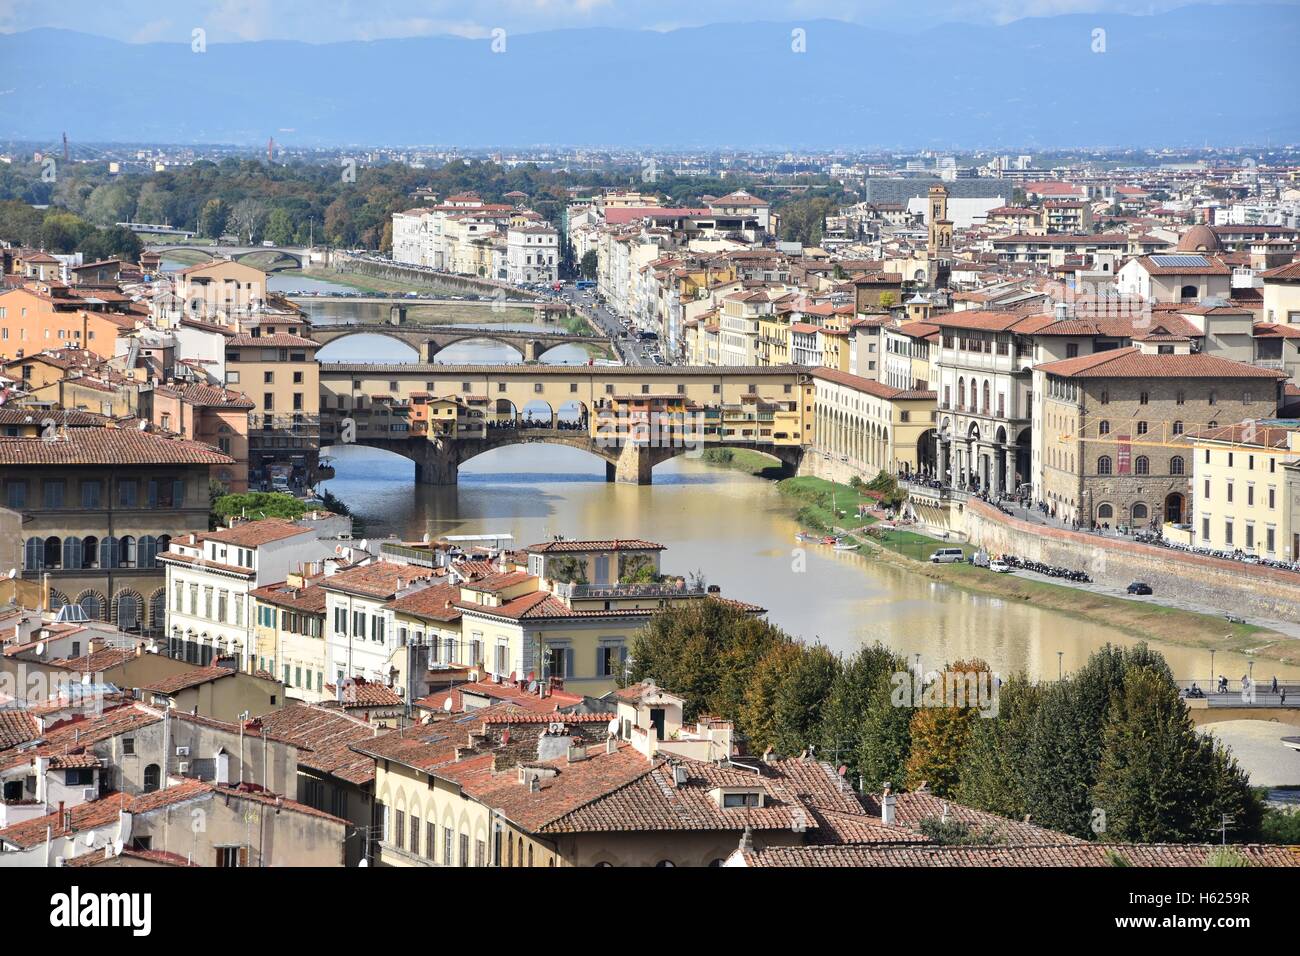 The Arno river of Florence with the Ponte Vecchio, a side view of the Uffizi Gallery and a part of the Vasari Corridor Stock Photo